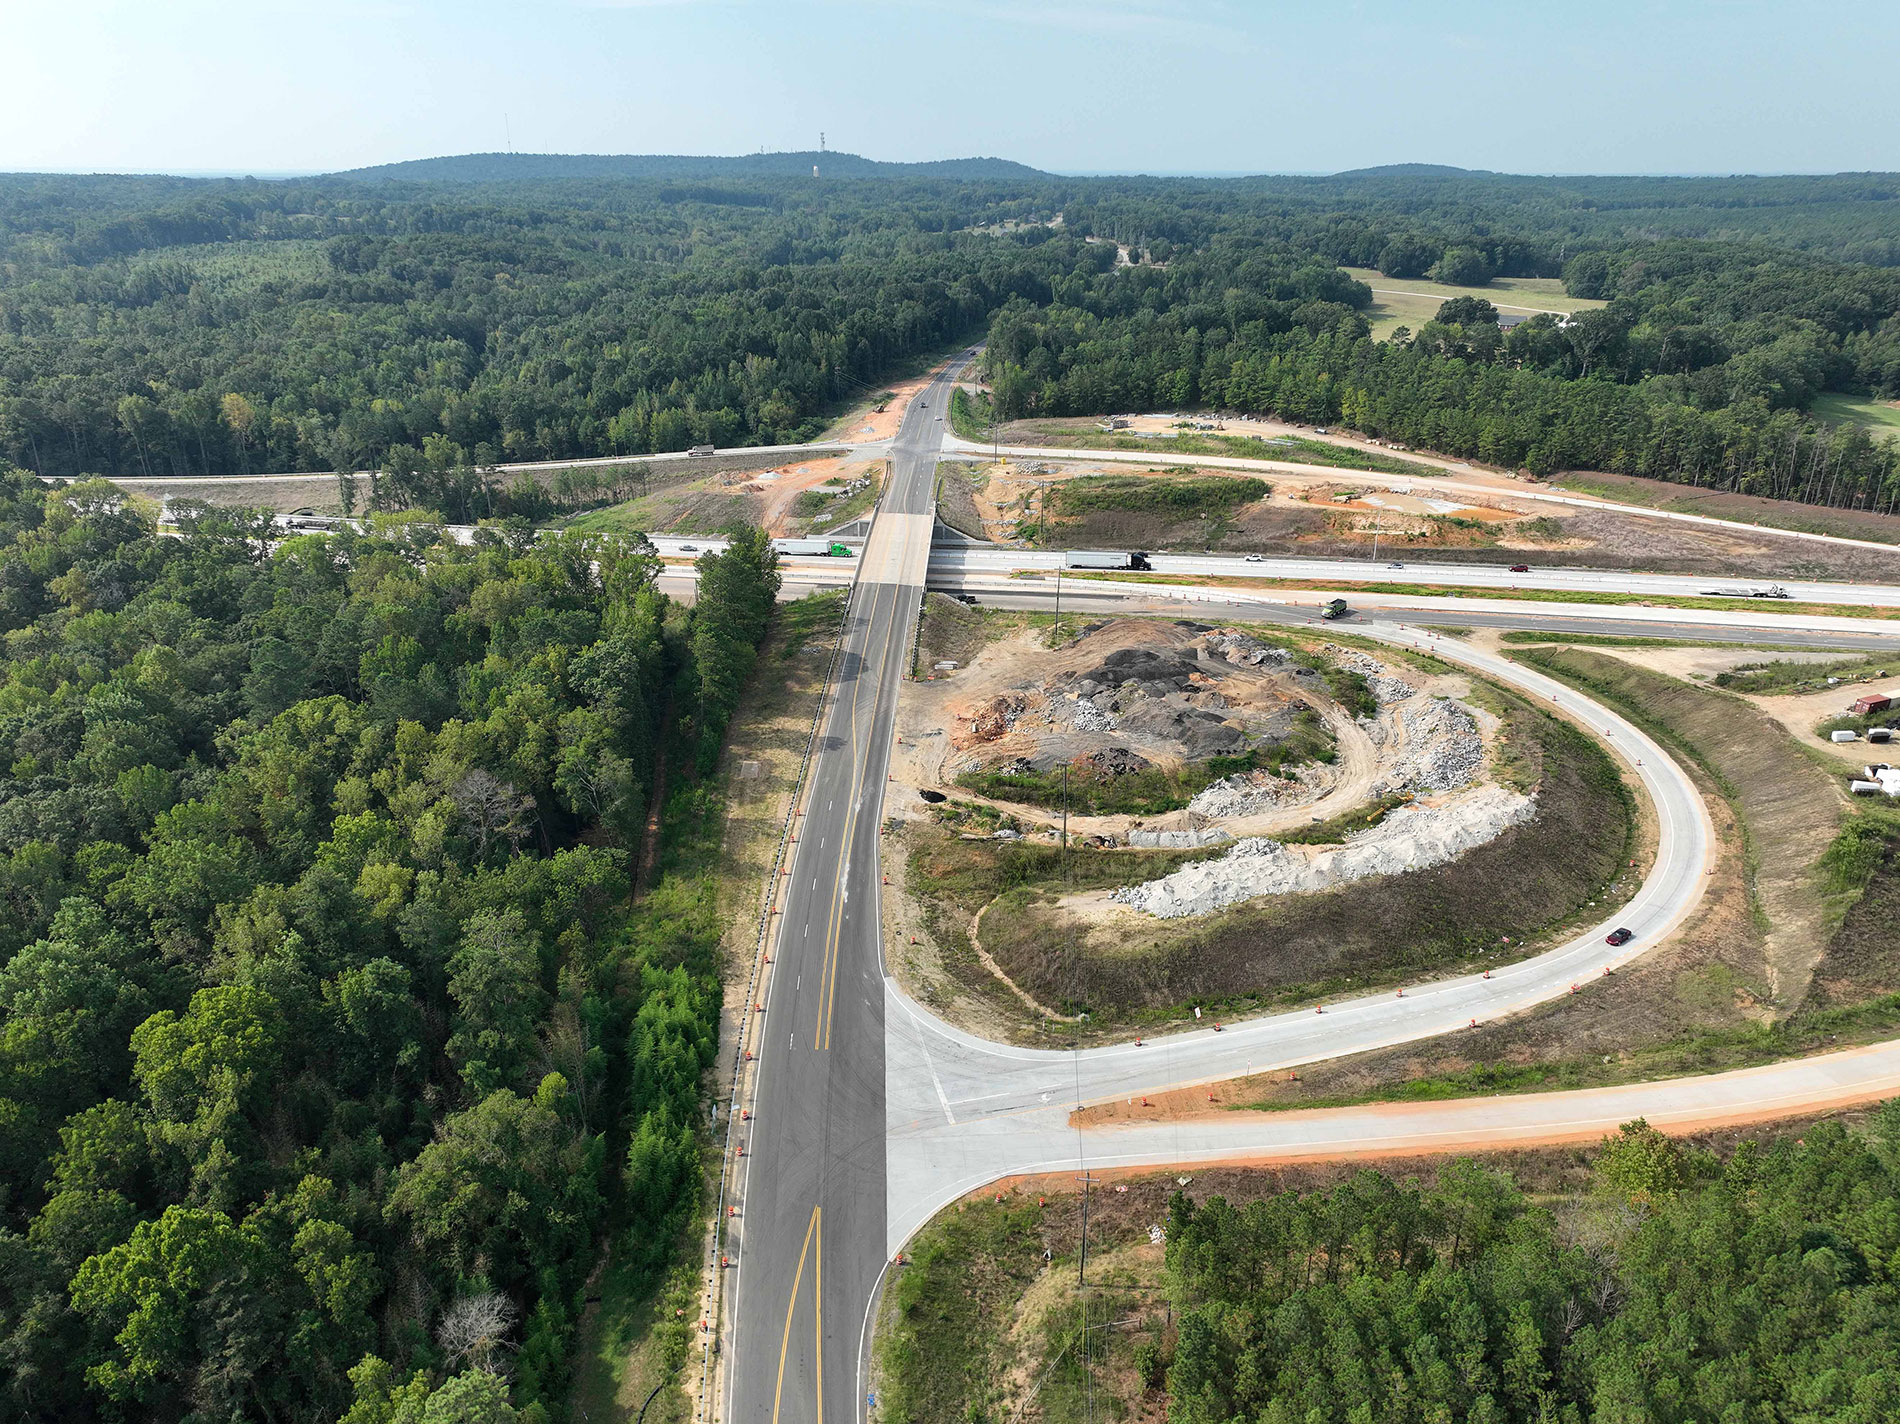 This photo shows the progress on the interchange at Exit 85 in Little Mountain.  The new bridge and all four of the new ramp connections have been completed.